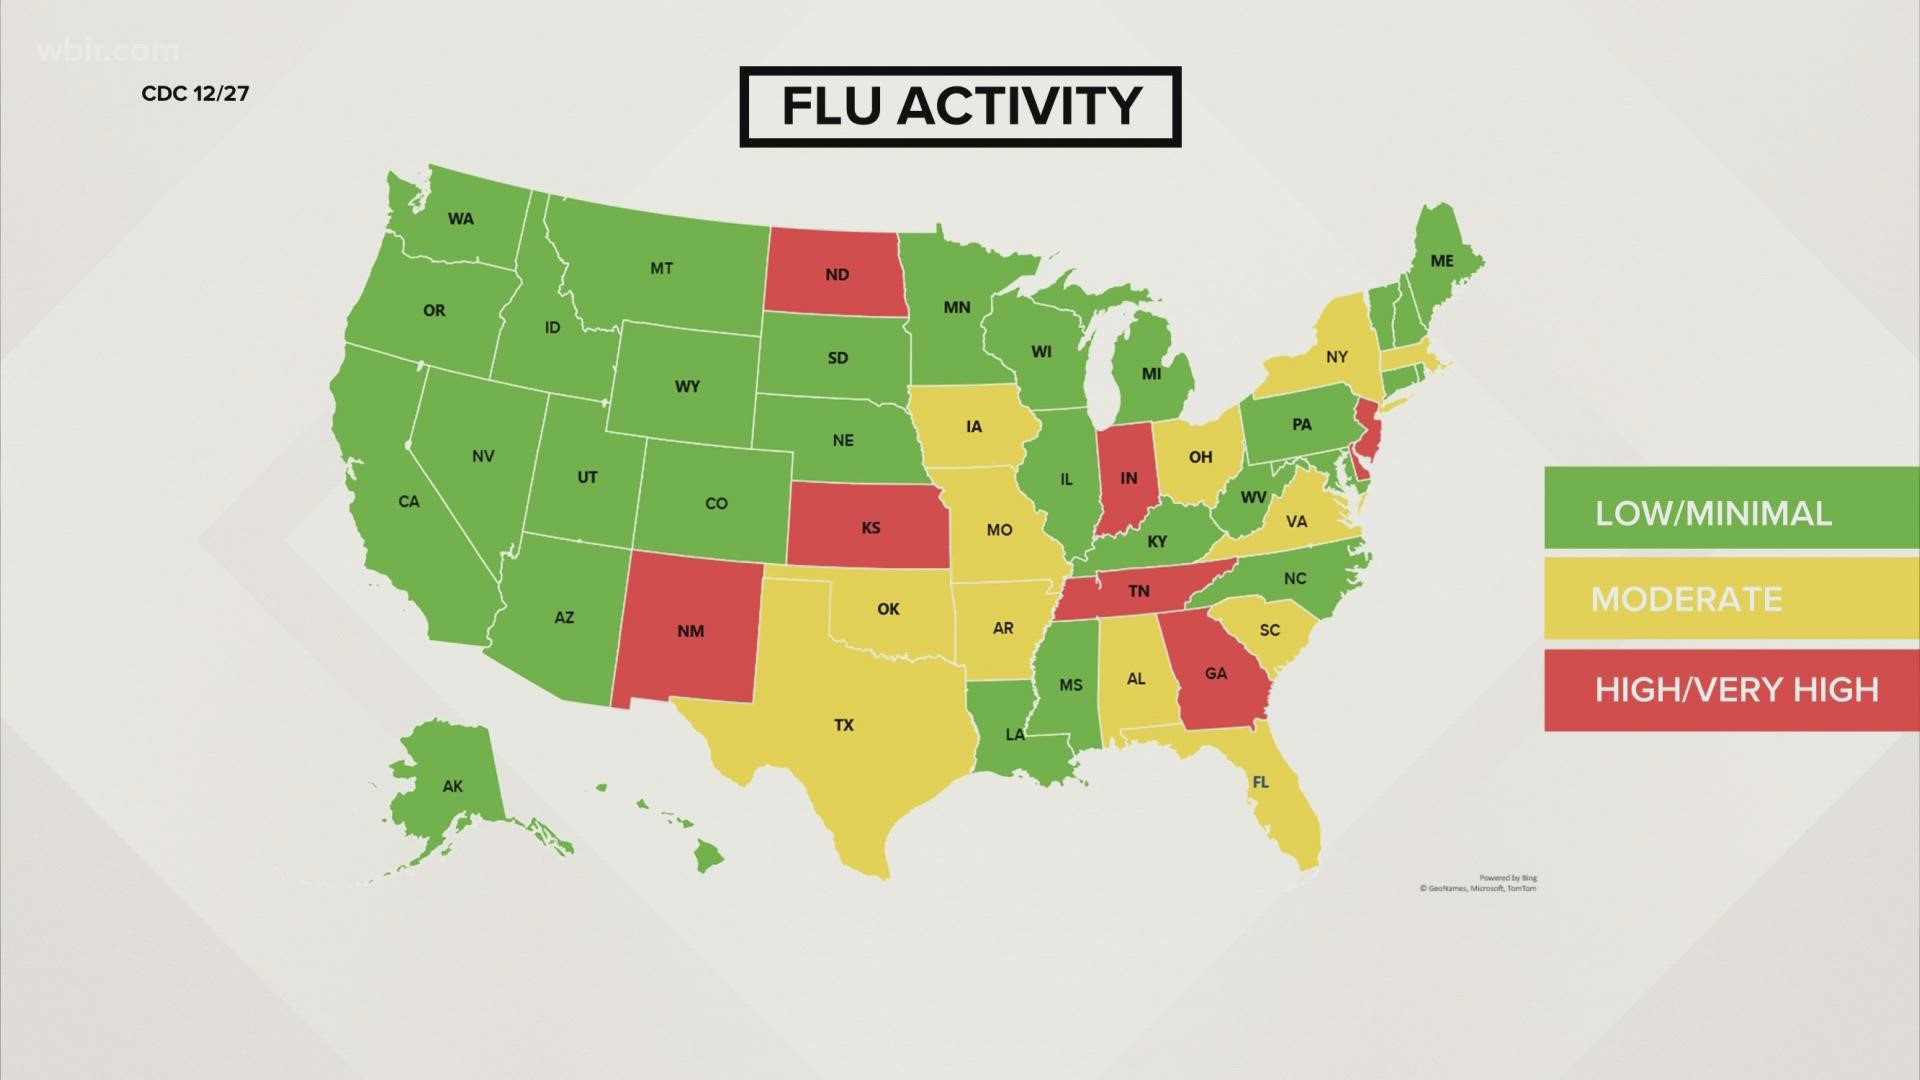 Flu activity high in Tennessee